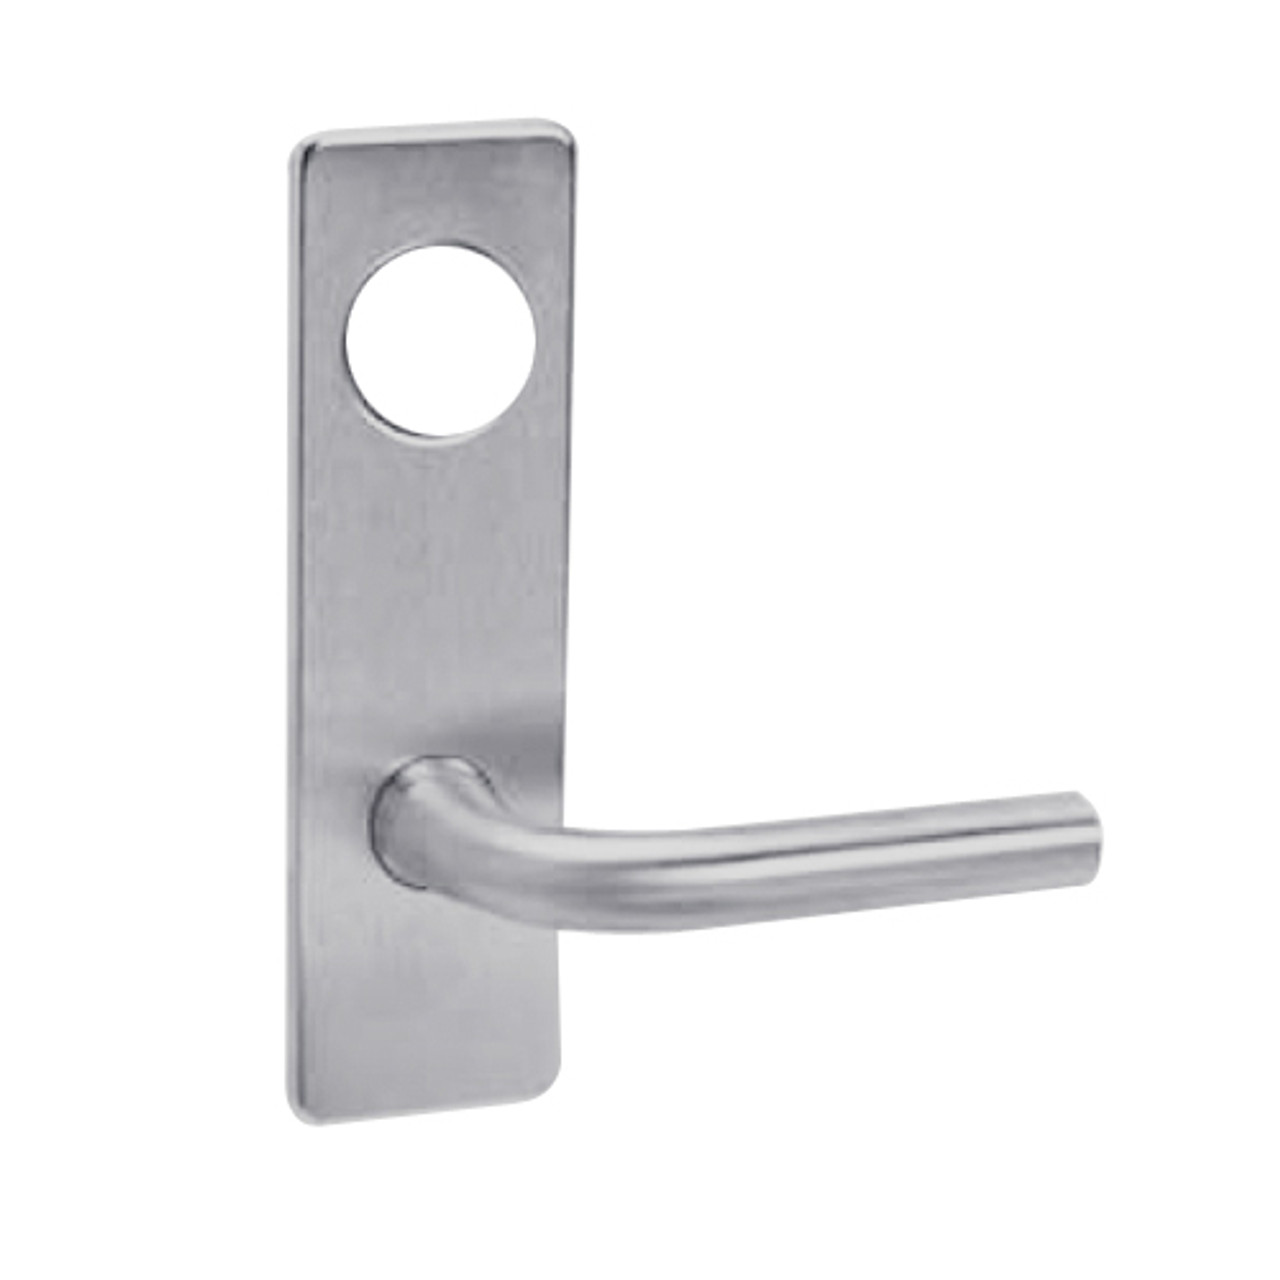 ML2048-RSP-626-CL6 Corbin Russwin ML2000 Series IC 6-Pin Less Core Mortise Entrance Locksets with Regis Lever in Satin Chrome